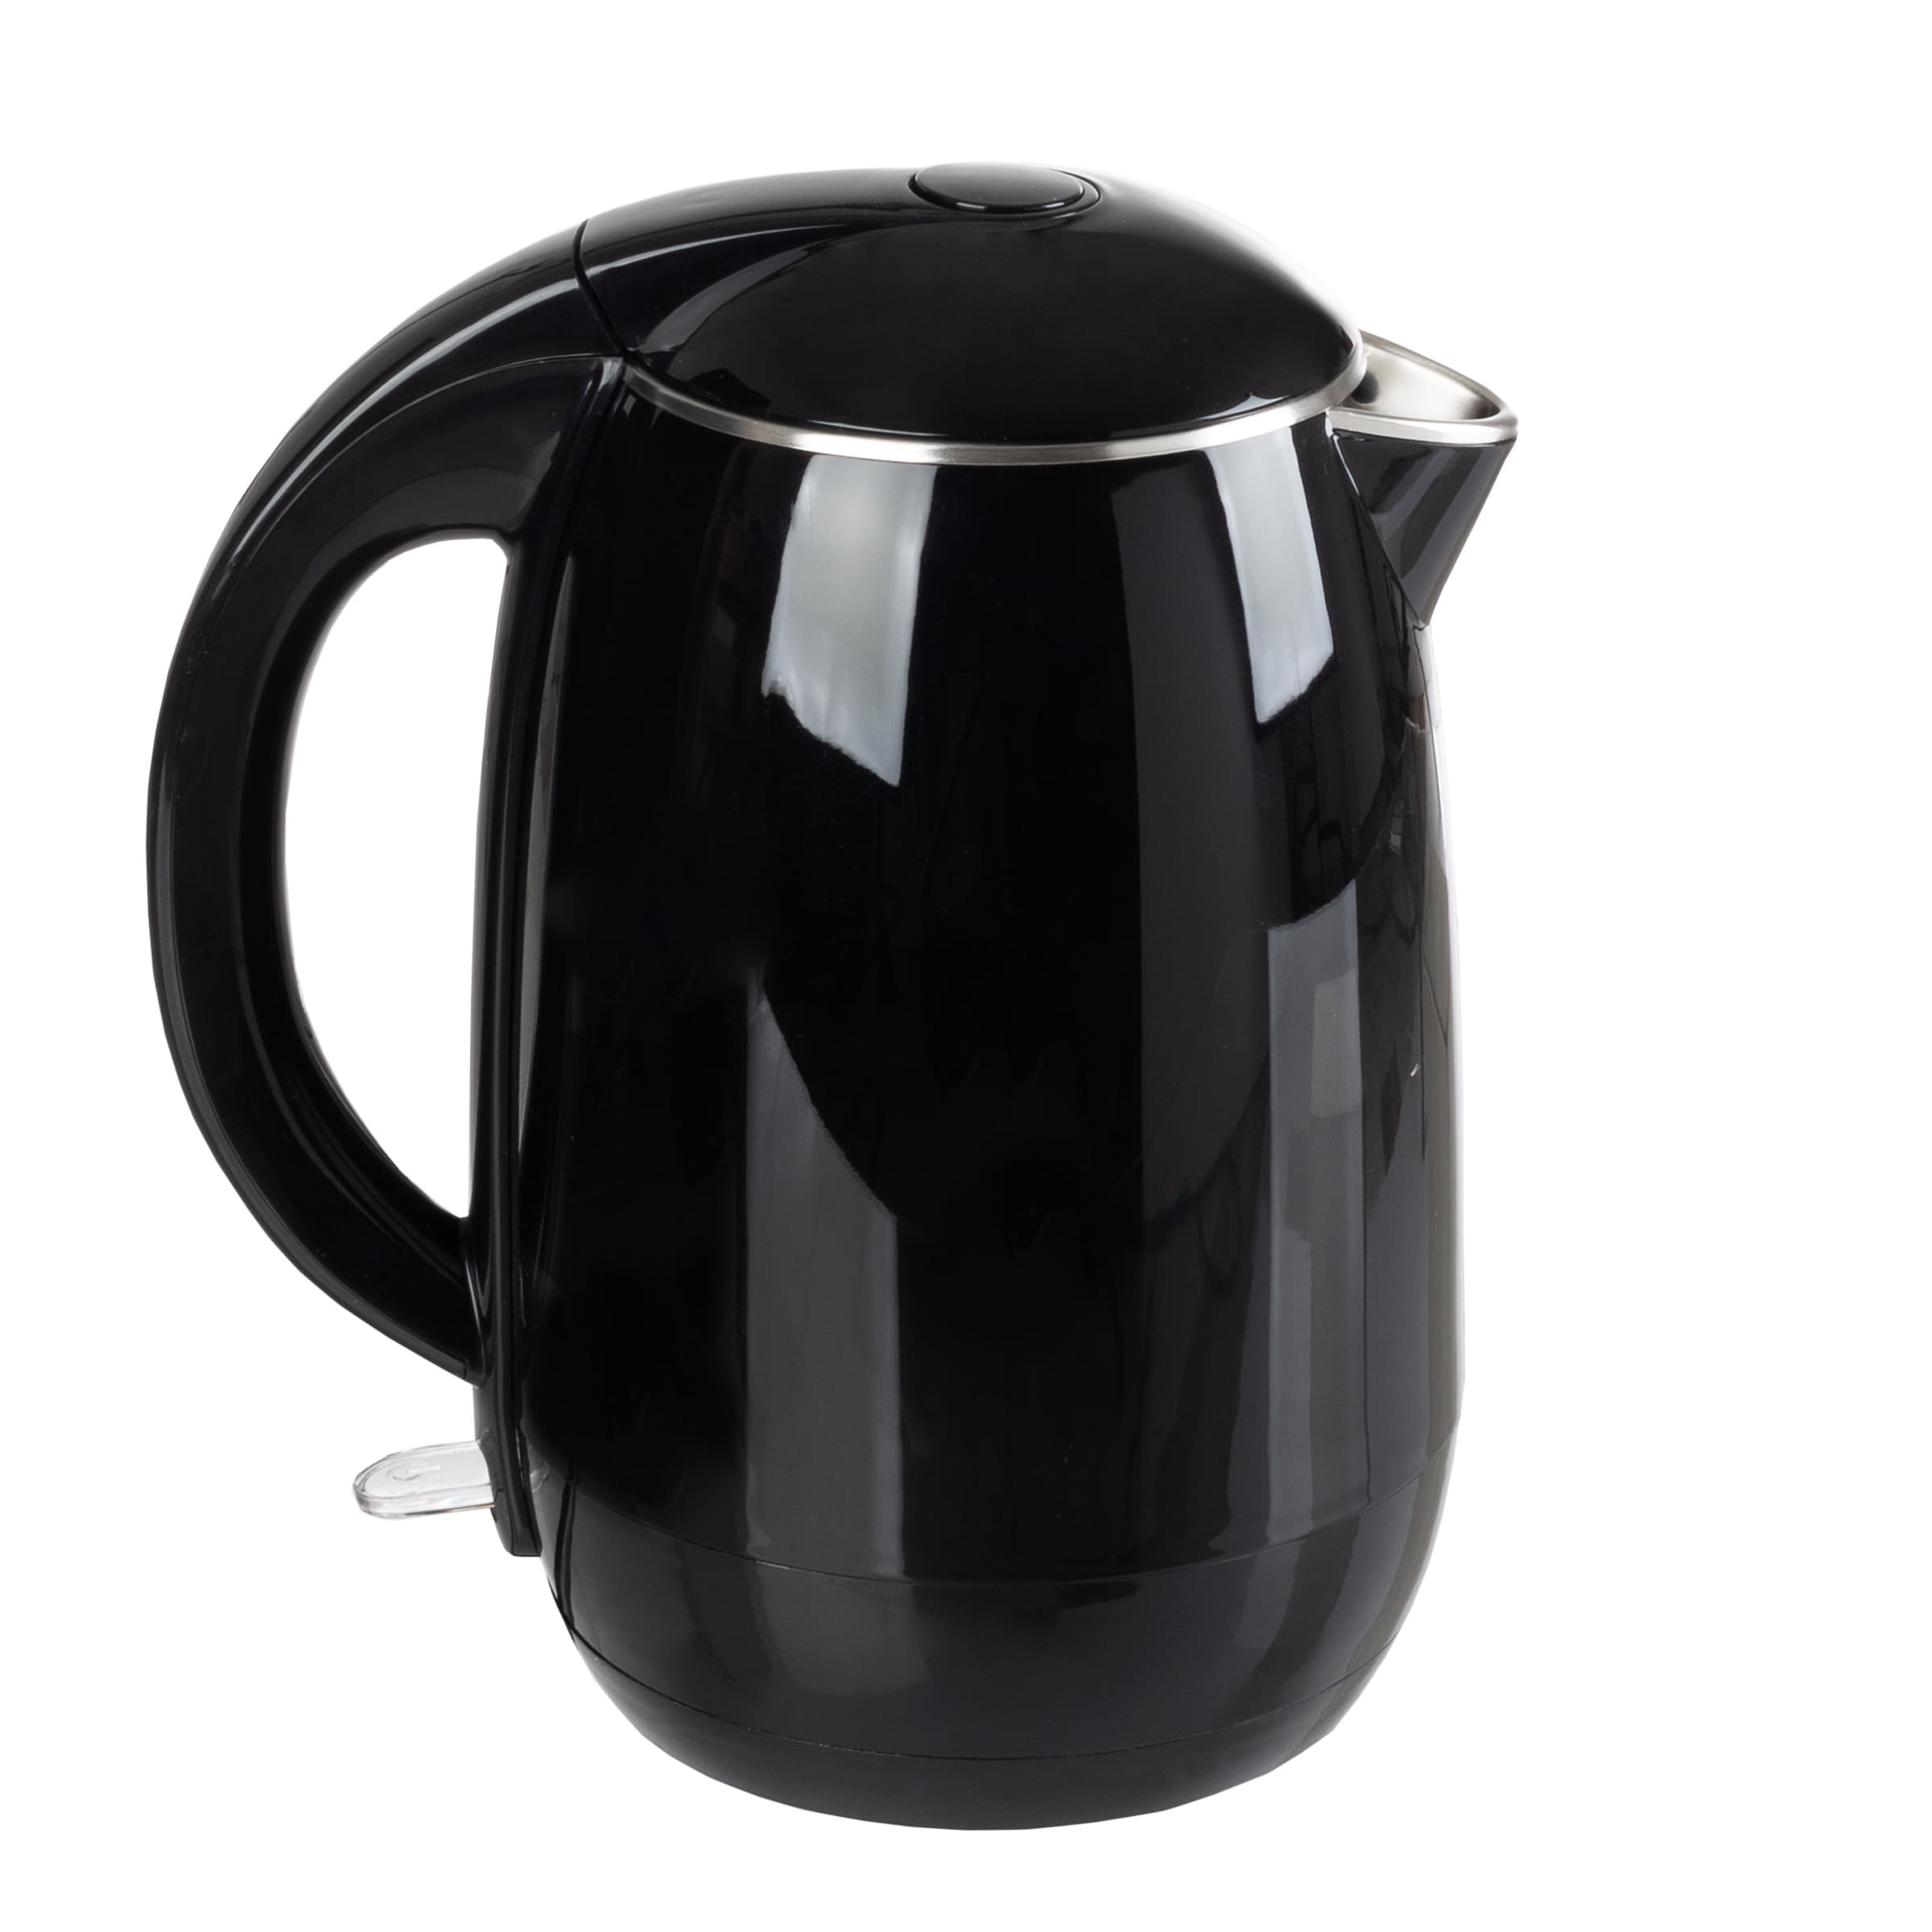 Aroma 1L Electric Water Kettle - Stainless Steel Tea Coffee Rapid